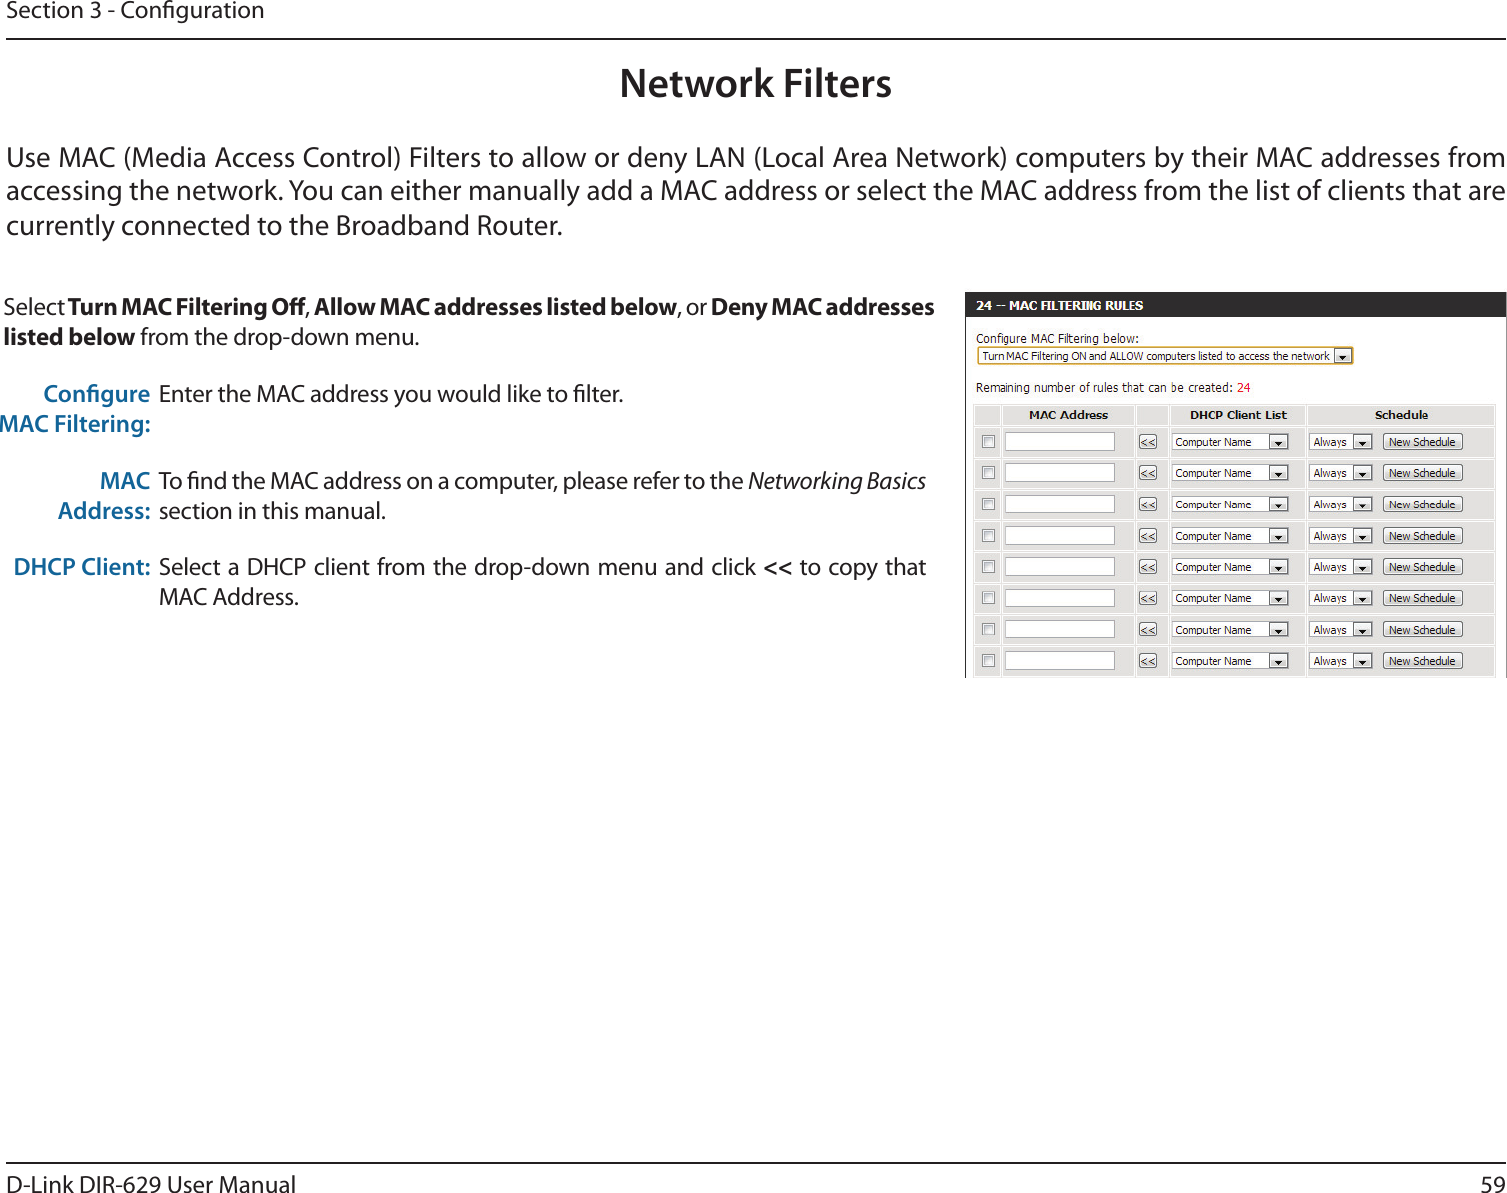 59D-Link DIR-629 User ManualSection 3 - CongurationNetwork FiltersUse MAC (Media Access Control) Filters to allow or deny LAN (Local Area Network) computers by their MAC addresses from Select, , or listed below from the drop-down menu. Congure MAC Filtering:Enter the MAC address you would like to lter.MAC Address:To nd the MAC address on a computer, please refer to the Networking Basics section in this manual.DHCP Client: Select a DHCP client from the drop-down menu and click &lt;&lt; to copy that MAC Address.